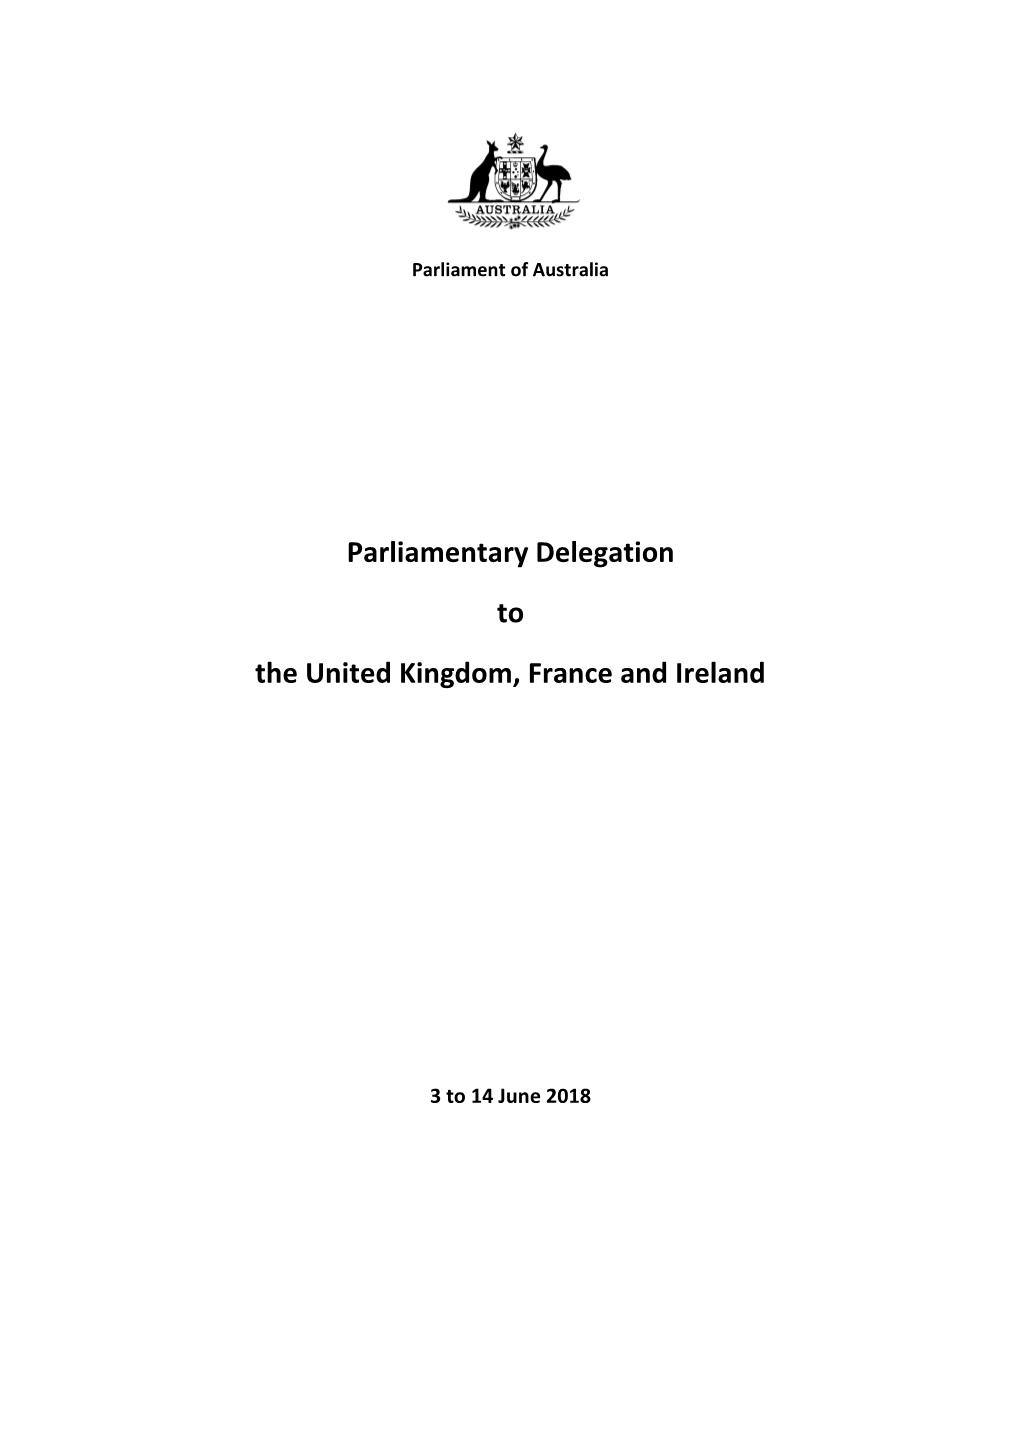 Parliamentary Delegation to the United Kingdom, France and Ireland